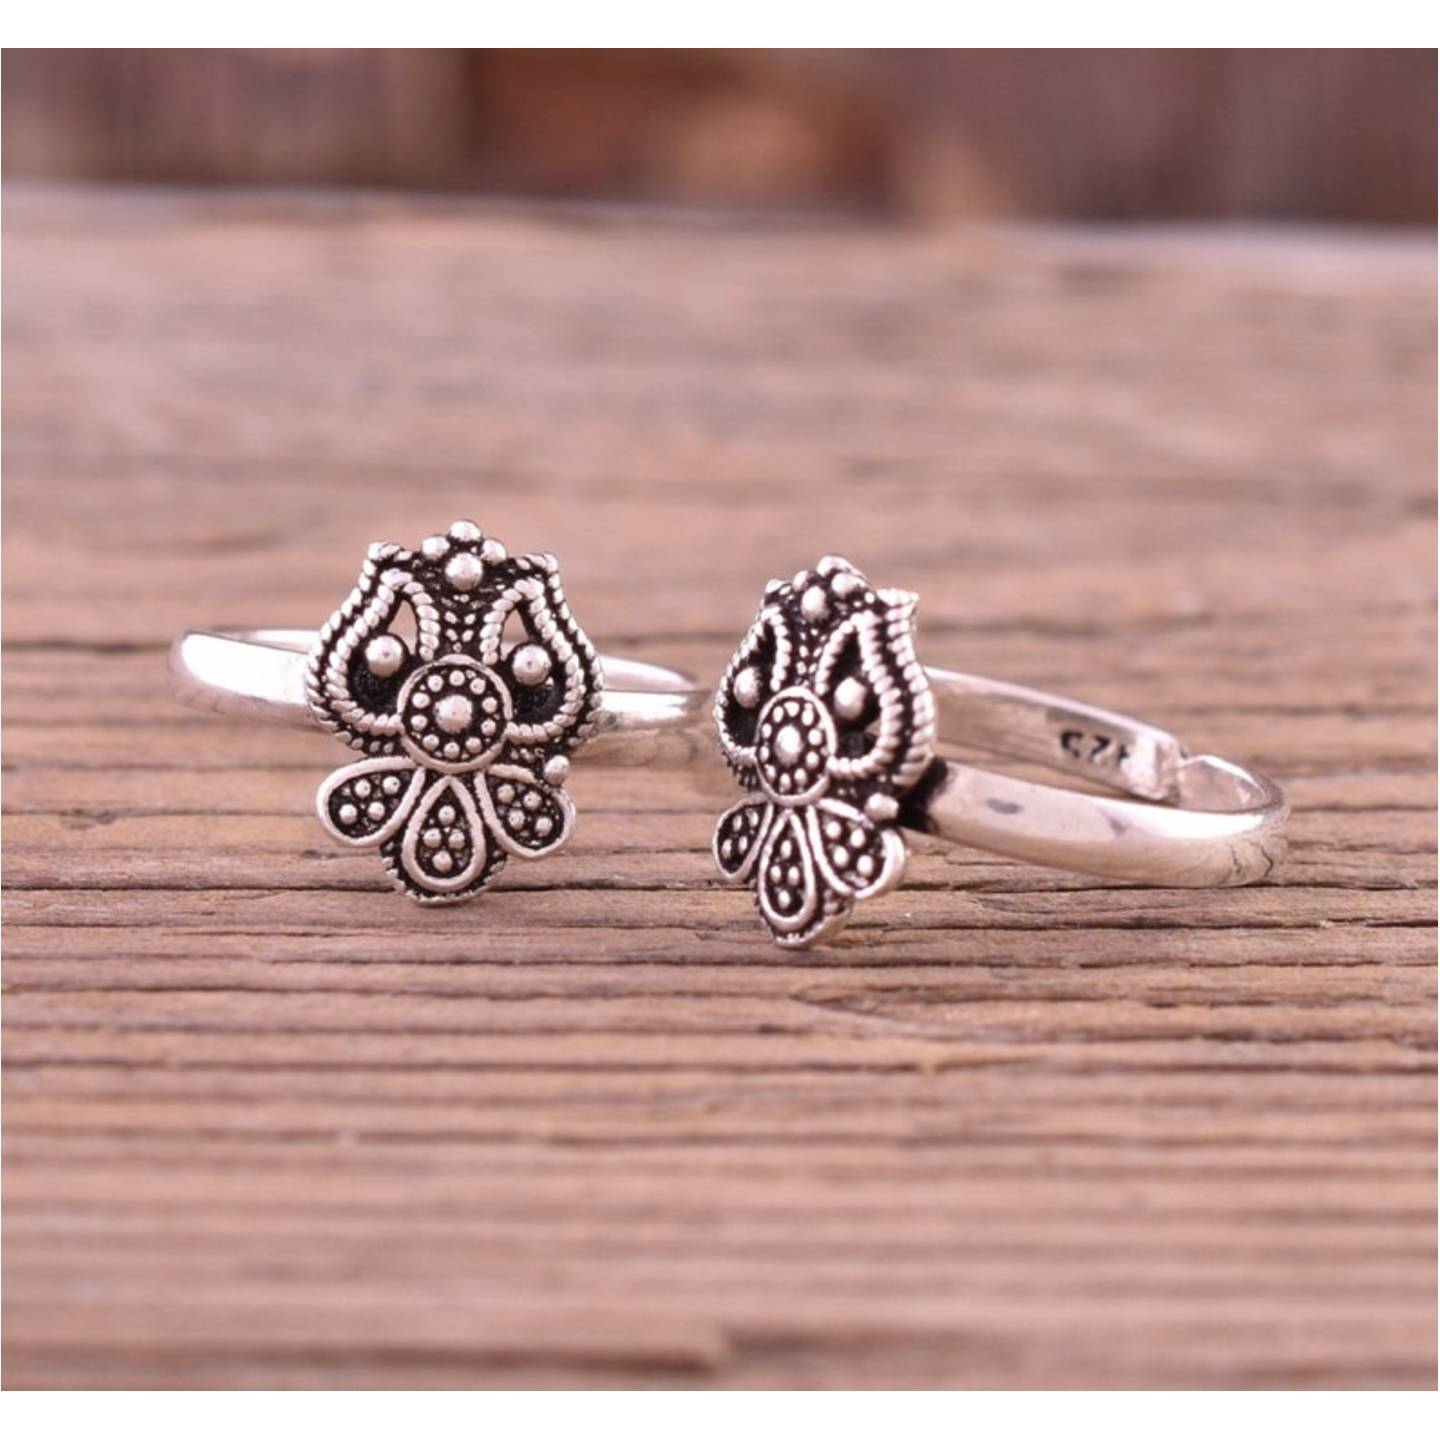 925 Solid Sterling Silver Toe Ring - Flower Toe Ring - Handmade Toe Ring - Adjustable Toe Band - Oxidize Silver Toe Ring - Midi Toe Ring